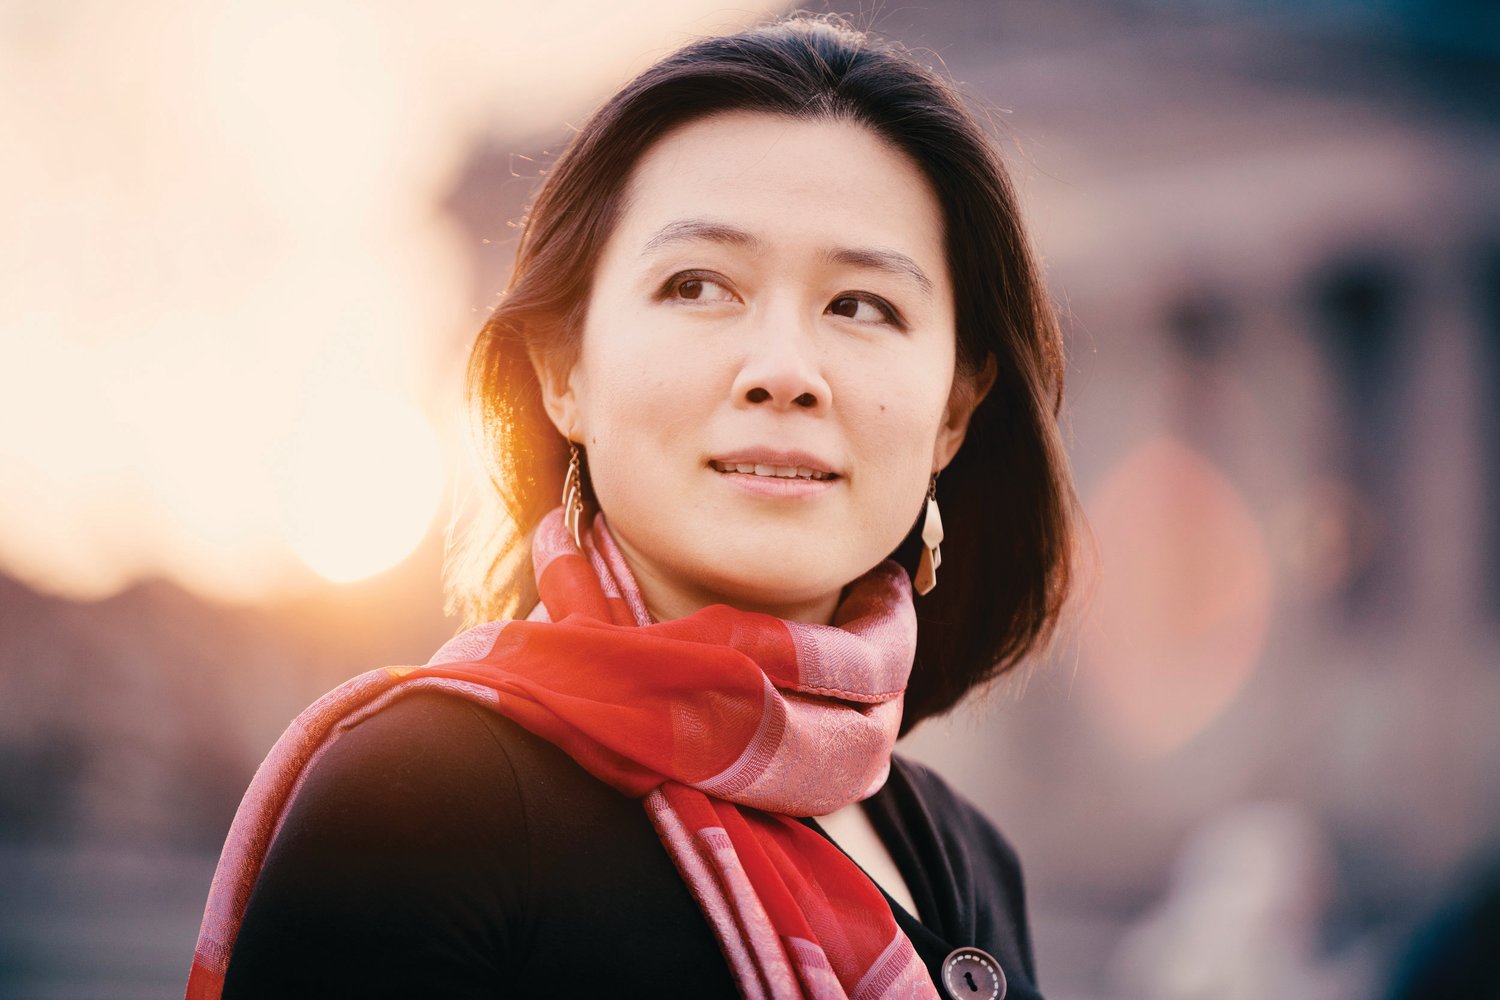 Amy Yang is the winner of the 2018 Musical Fund Society of Philadelphia prize and the Kosciuszko National Chopin Piano Competition. She’ll be performing this weekend alongside the Jasper String Quartet.